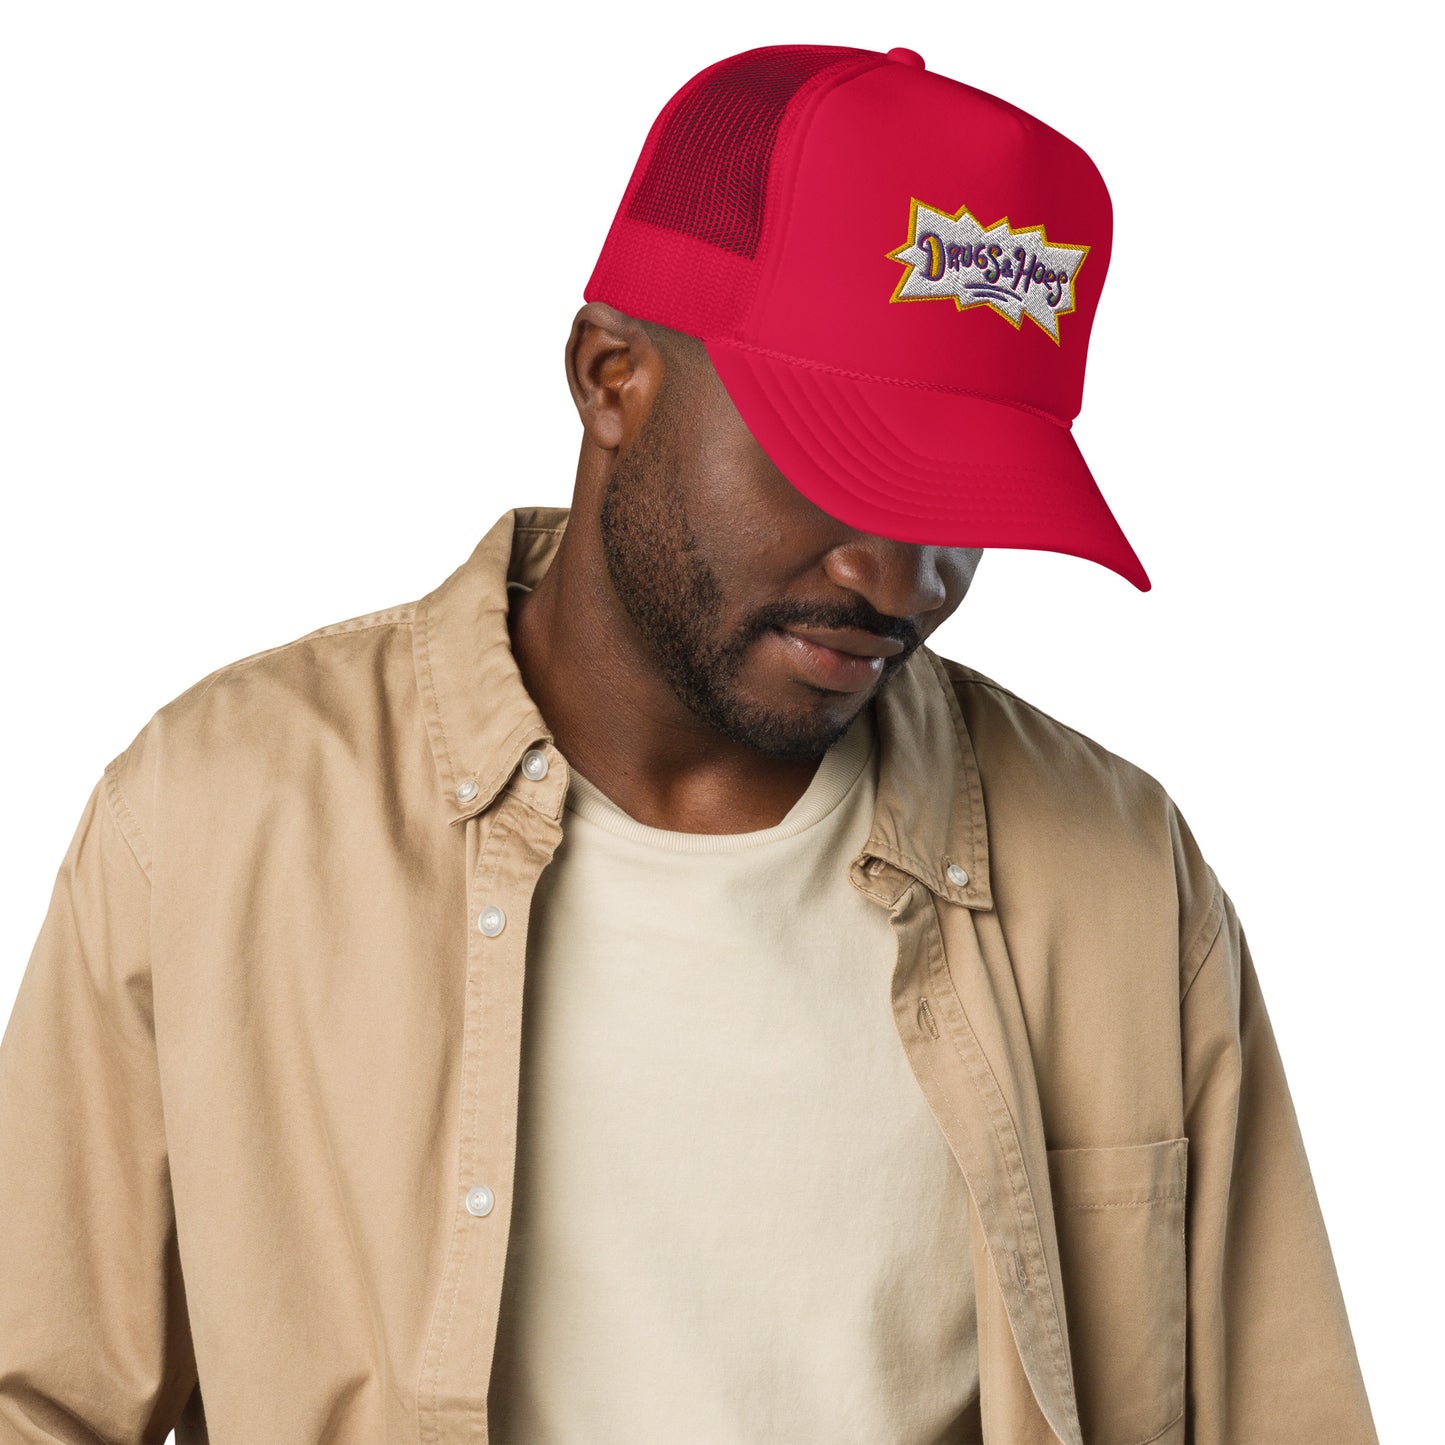 Drugz and Hoes Foam trucker hat